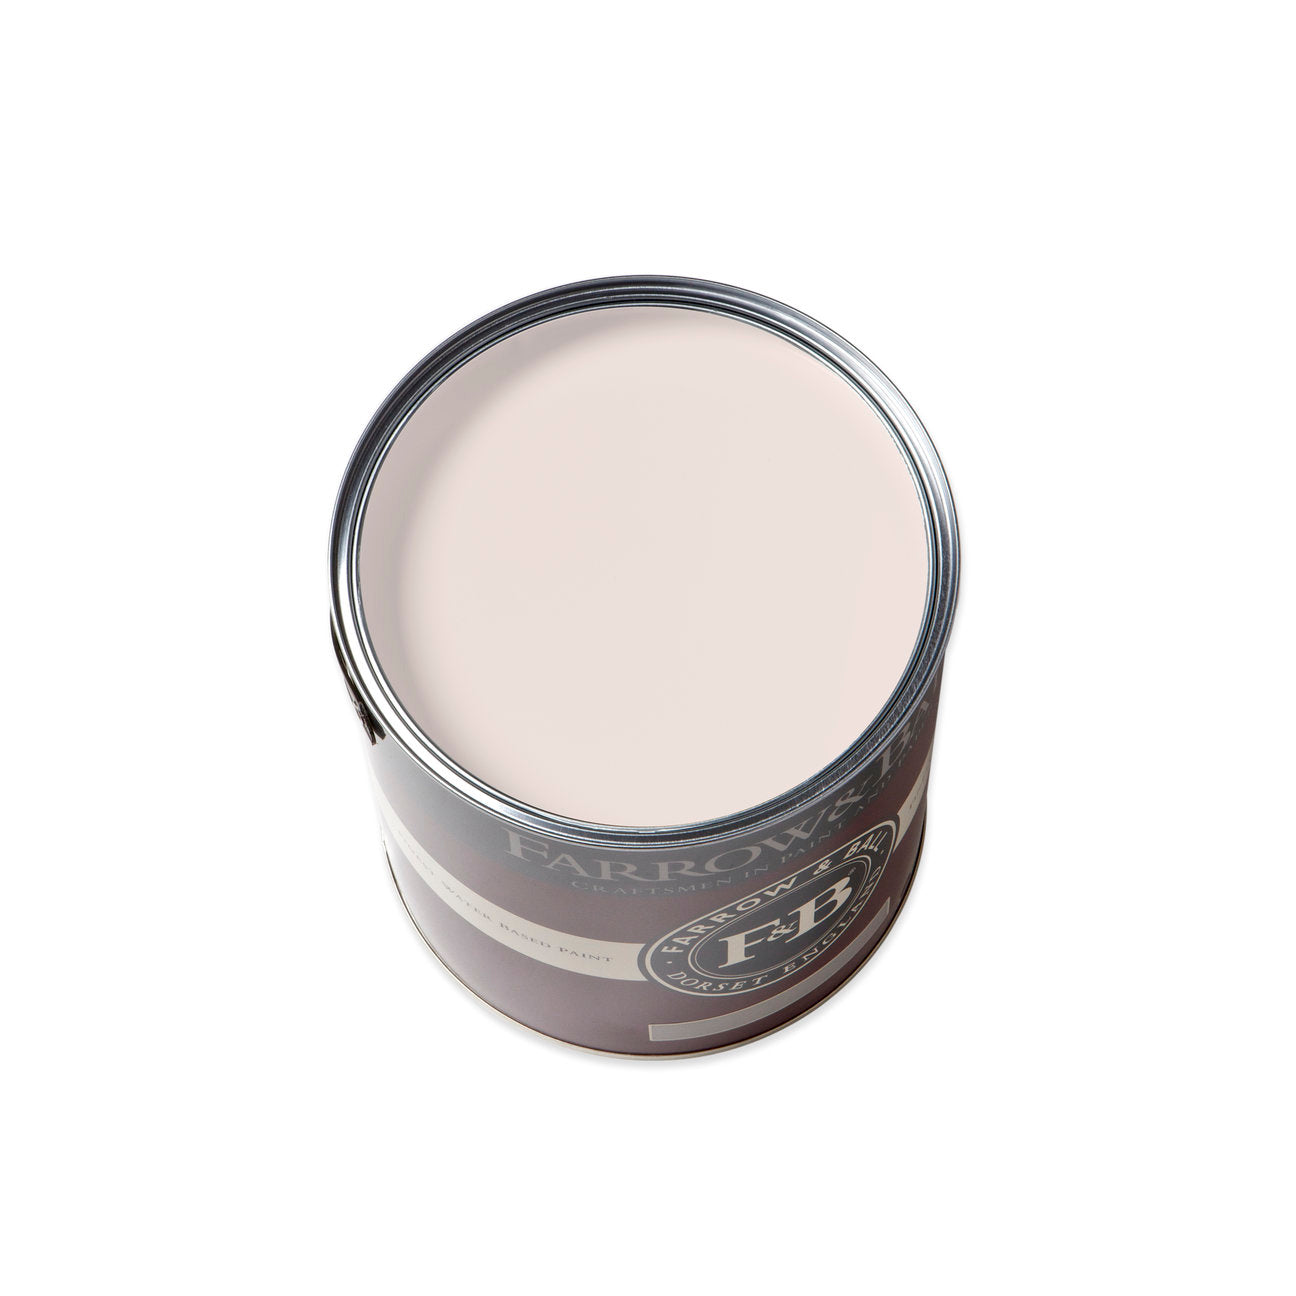 Wandfarbe - Farrow and Ball - Middleton Pink 245 - Emulsion